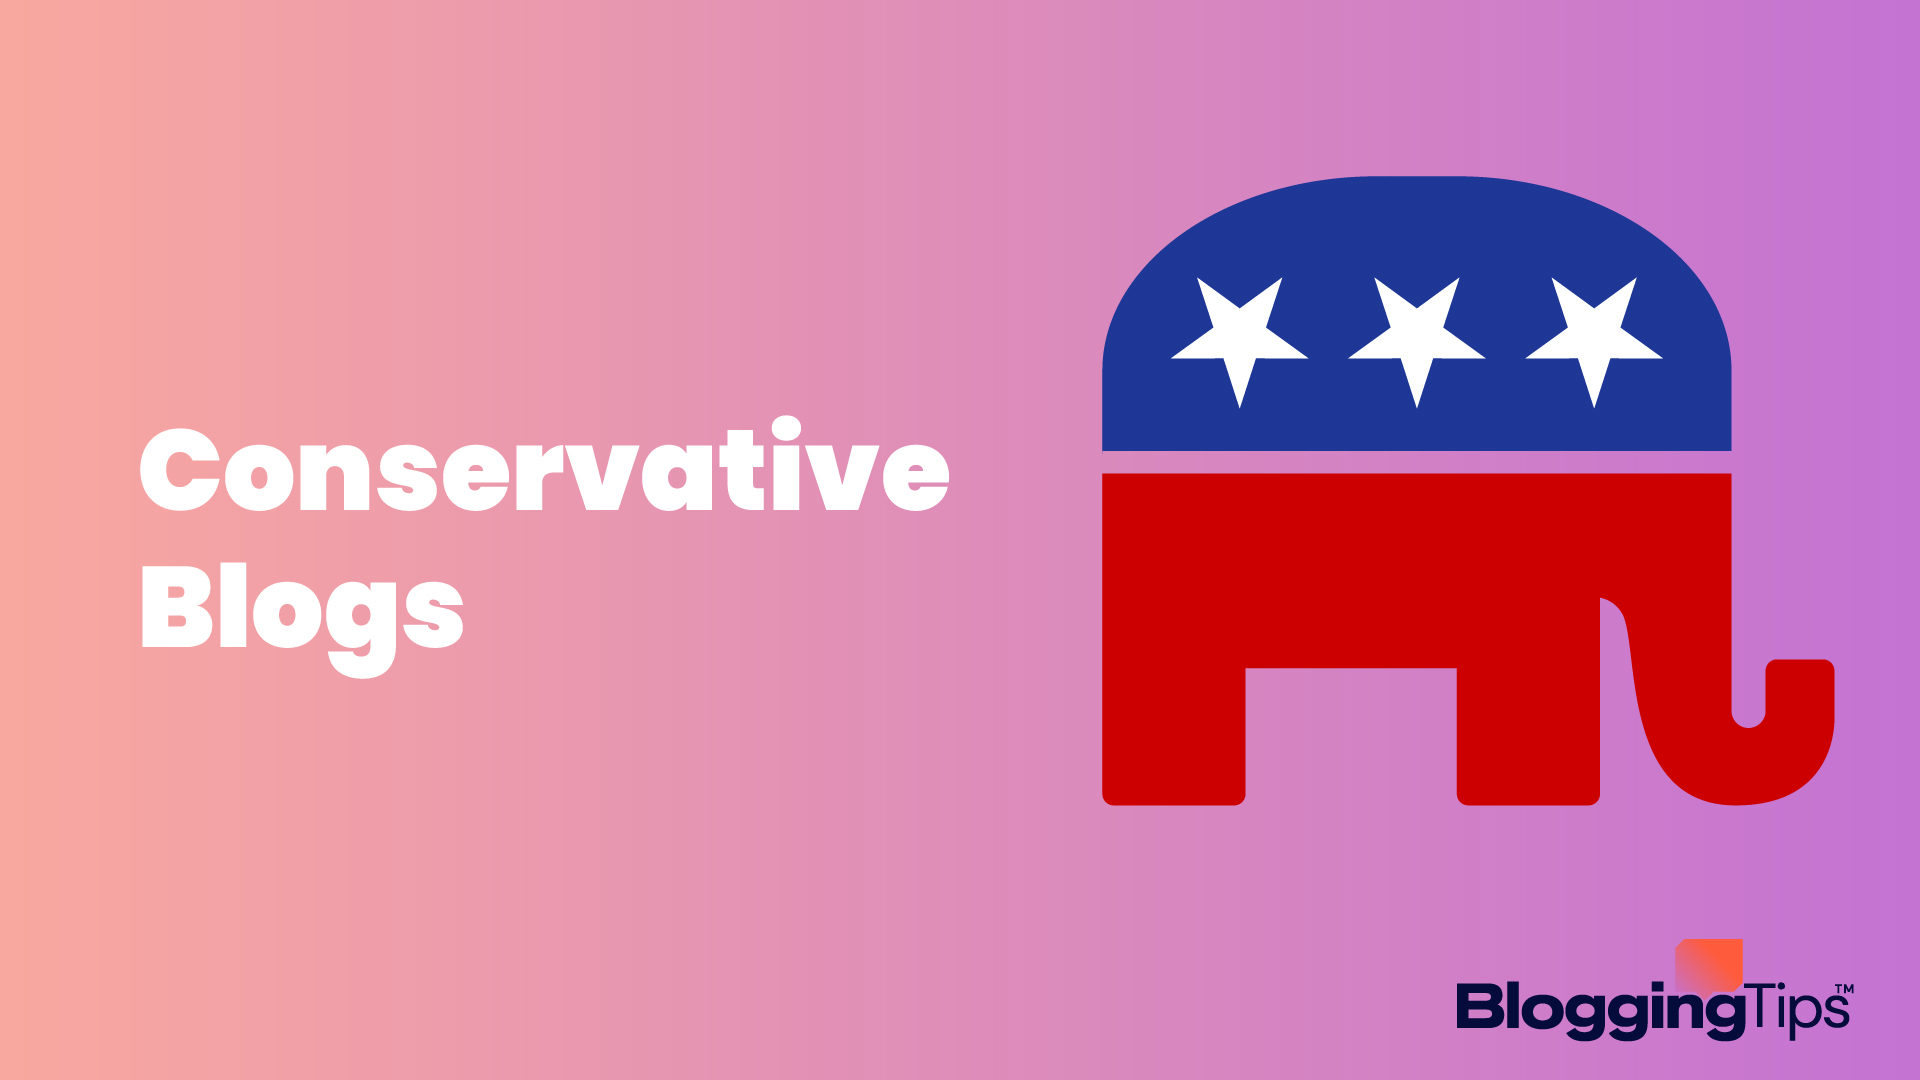 vector graphic showing an illustration of the republican elephant, with the words "Conservative Blogs" in block letters next to the graphic